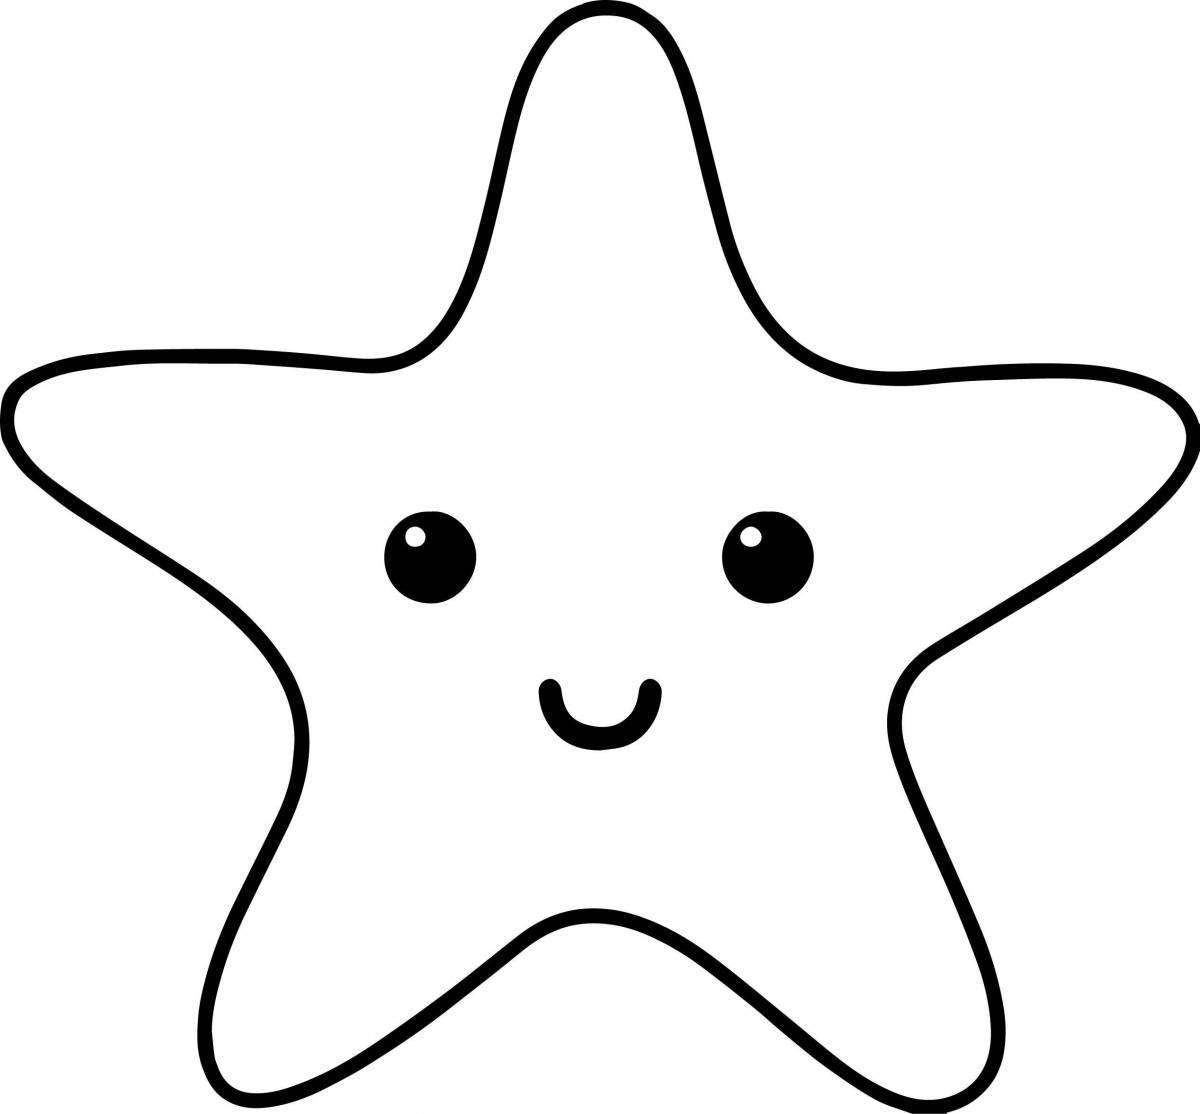 Dancing Star coloring page